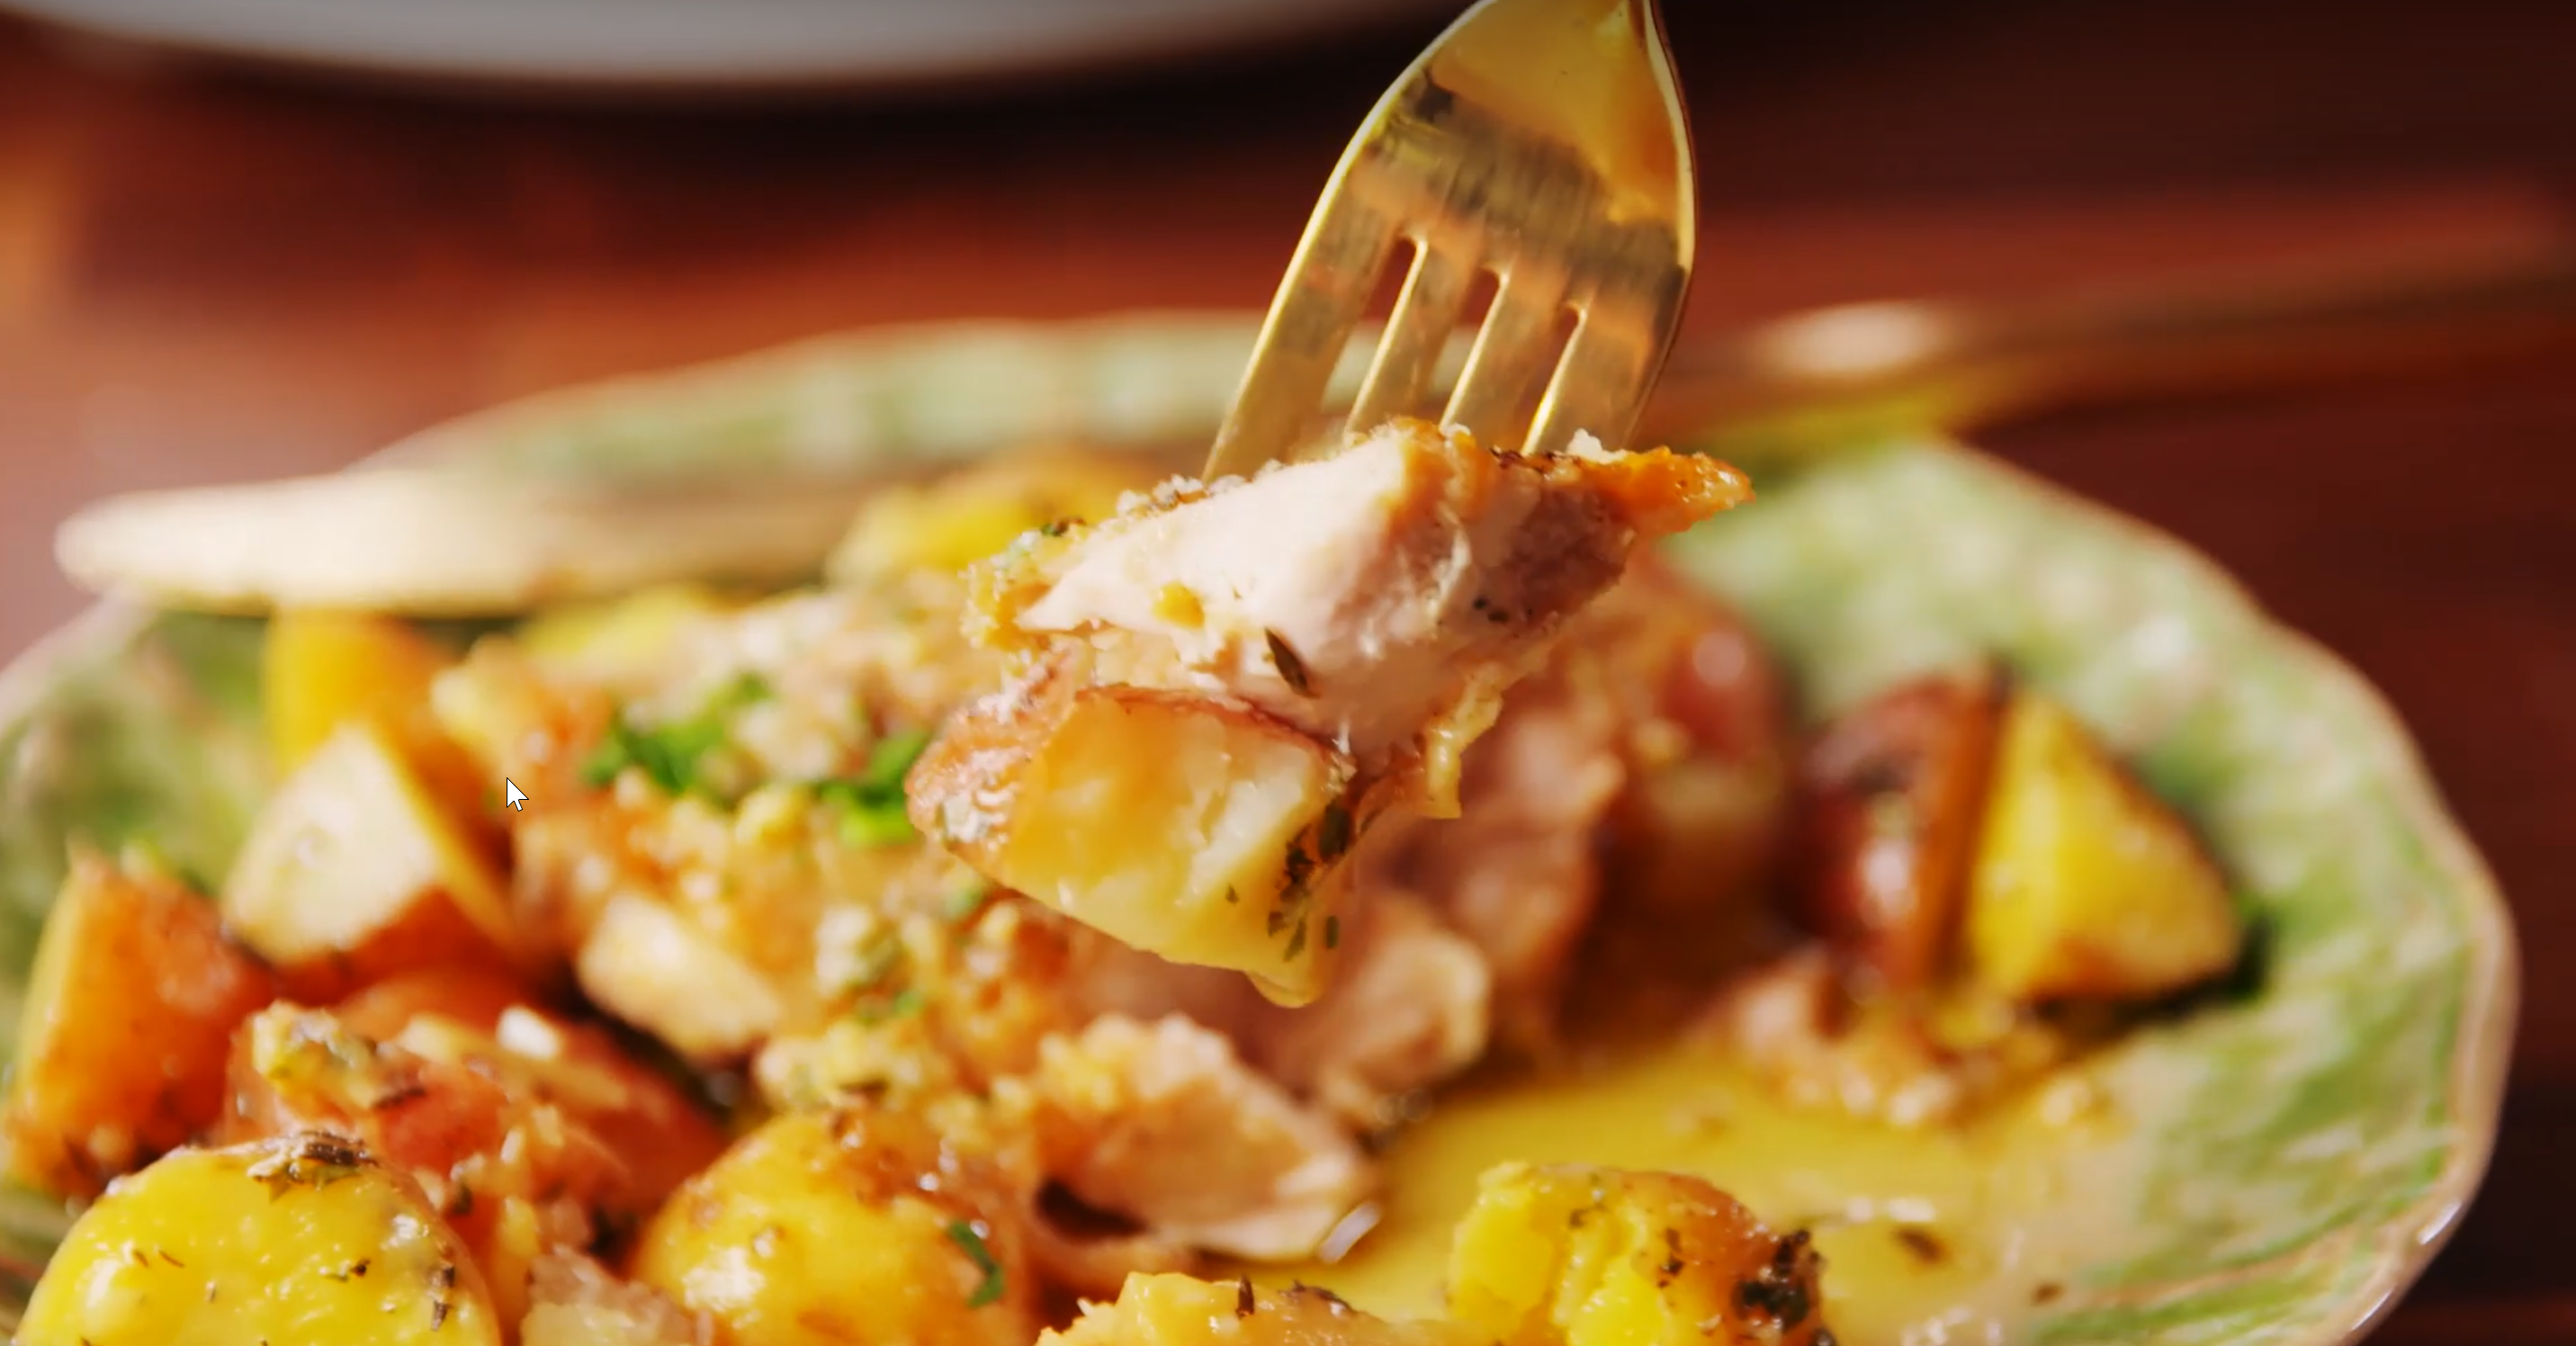 A Delightful Recipe for a Slow-Cooker Garlic-Parmesan Chicken